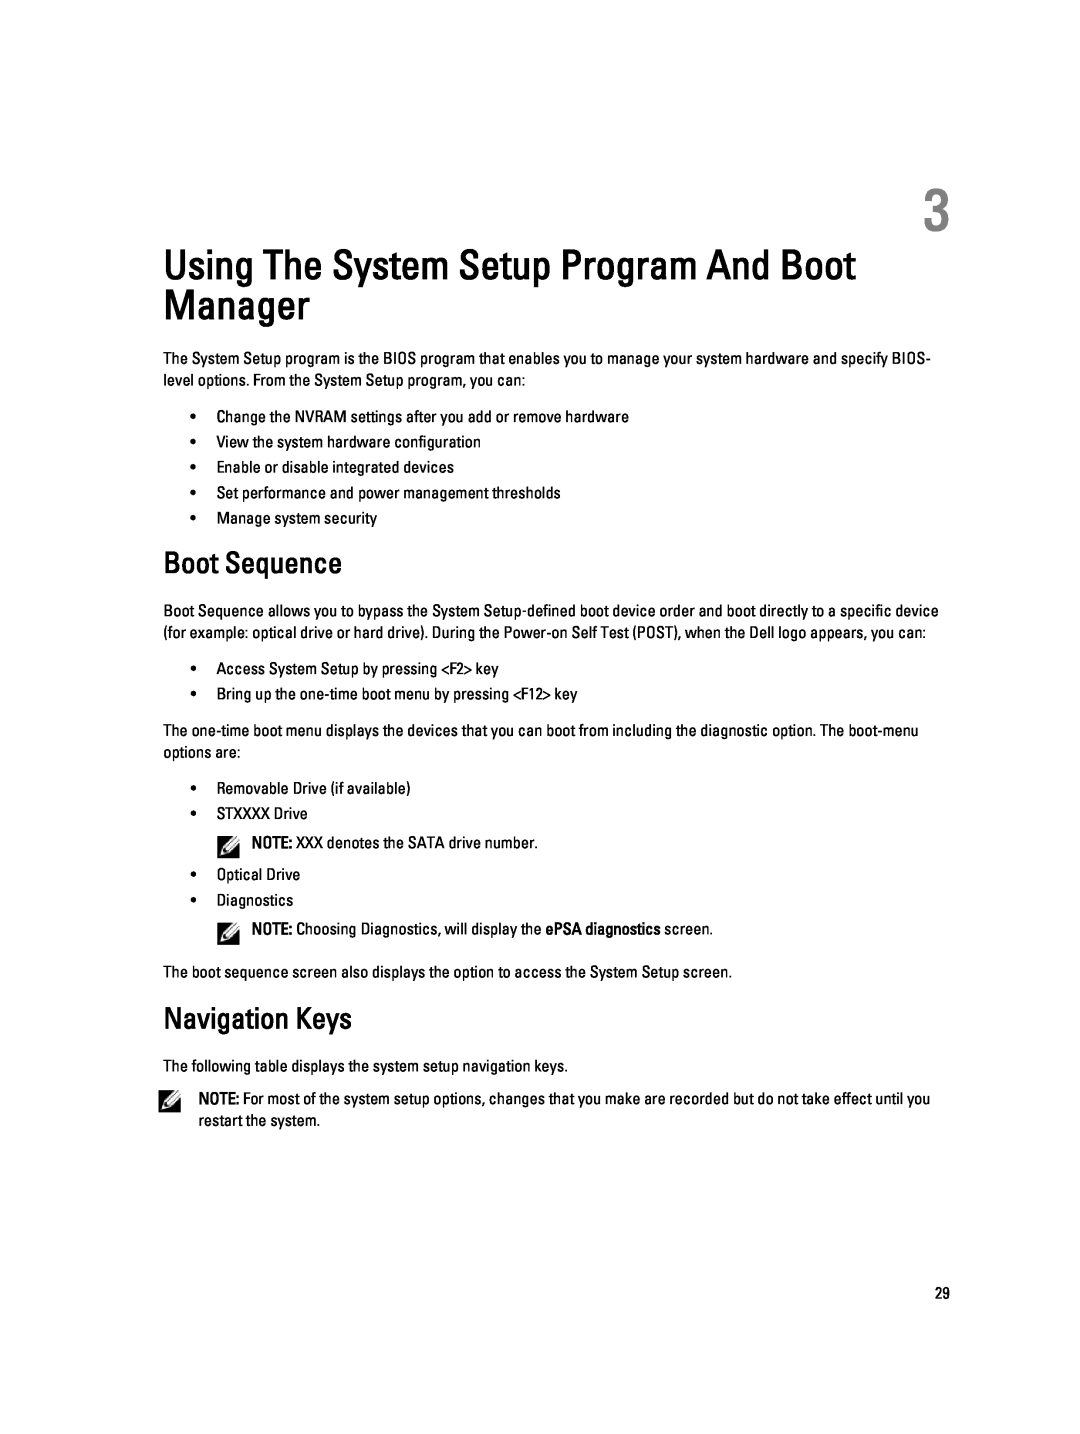 Dell T1700 owner manual Using The System Setup Program And Boot Manager, Boot Sequence, Navigation Keys 